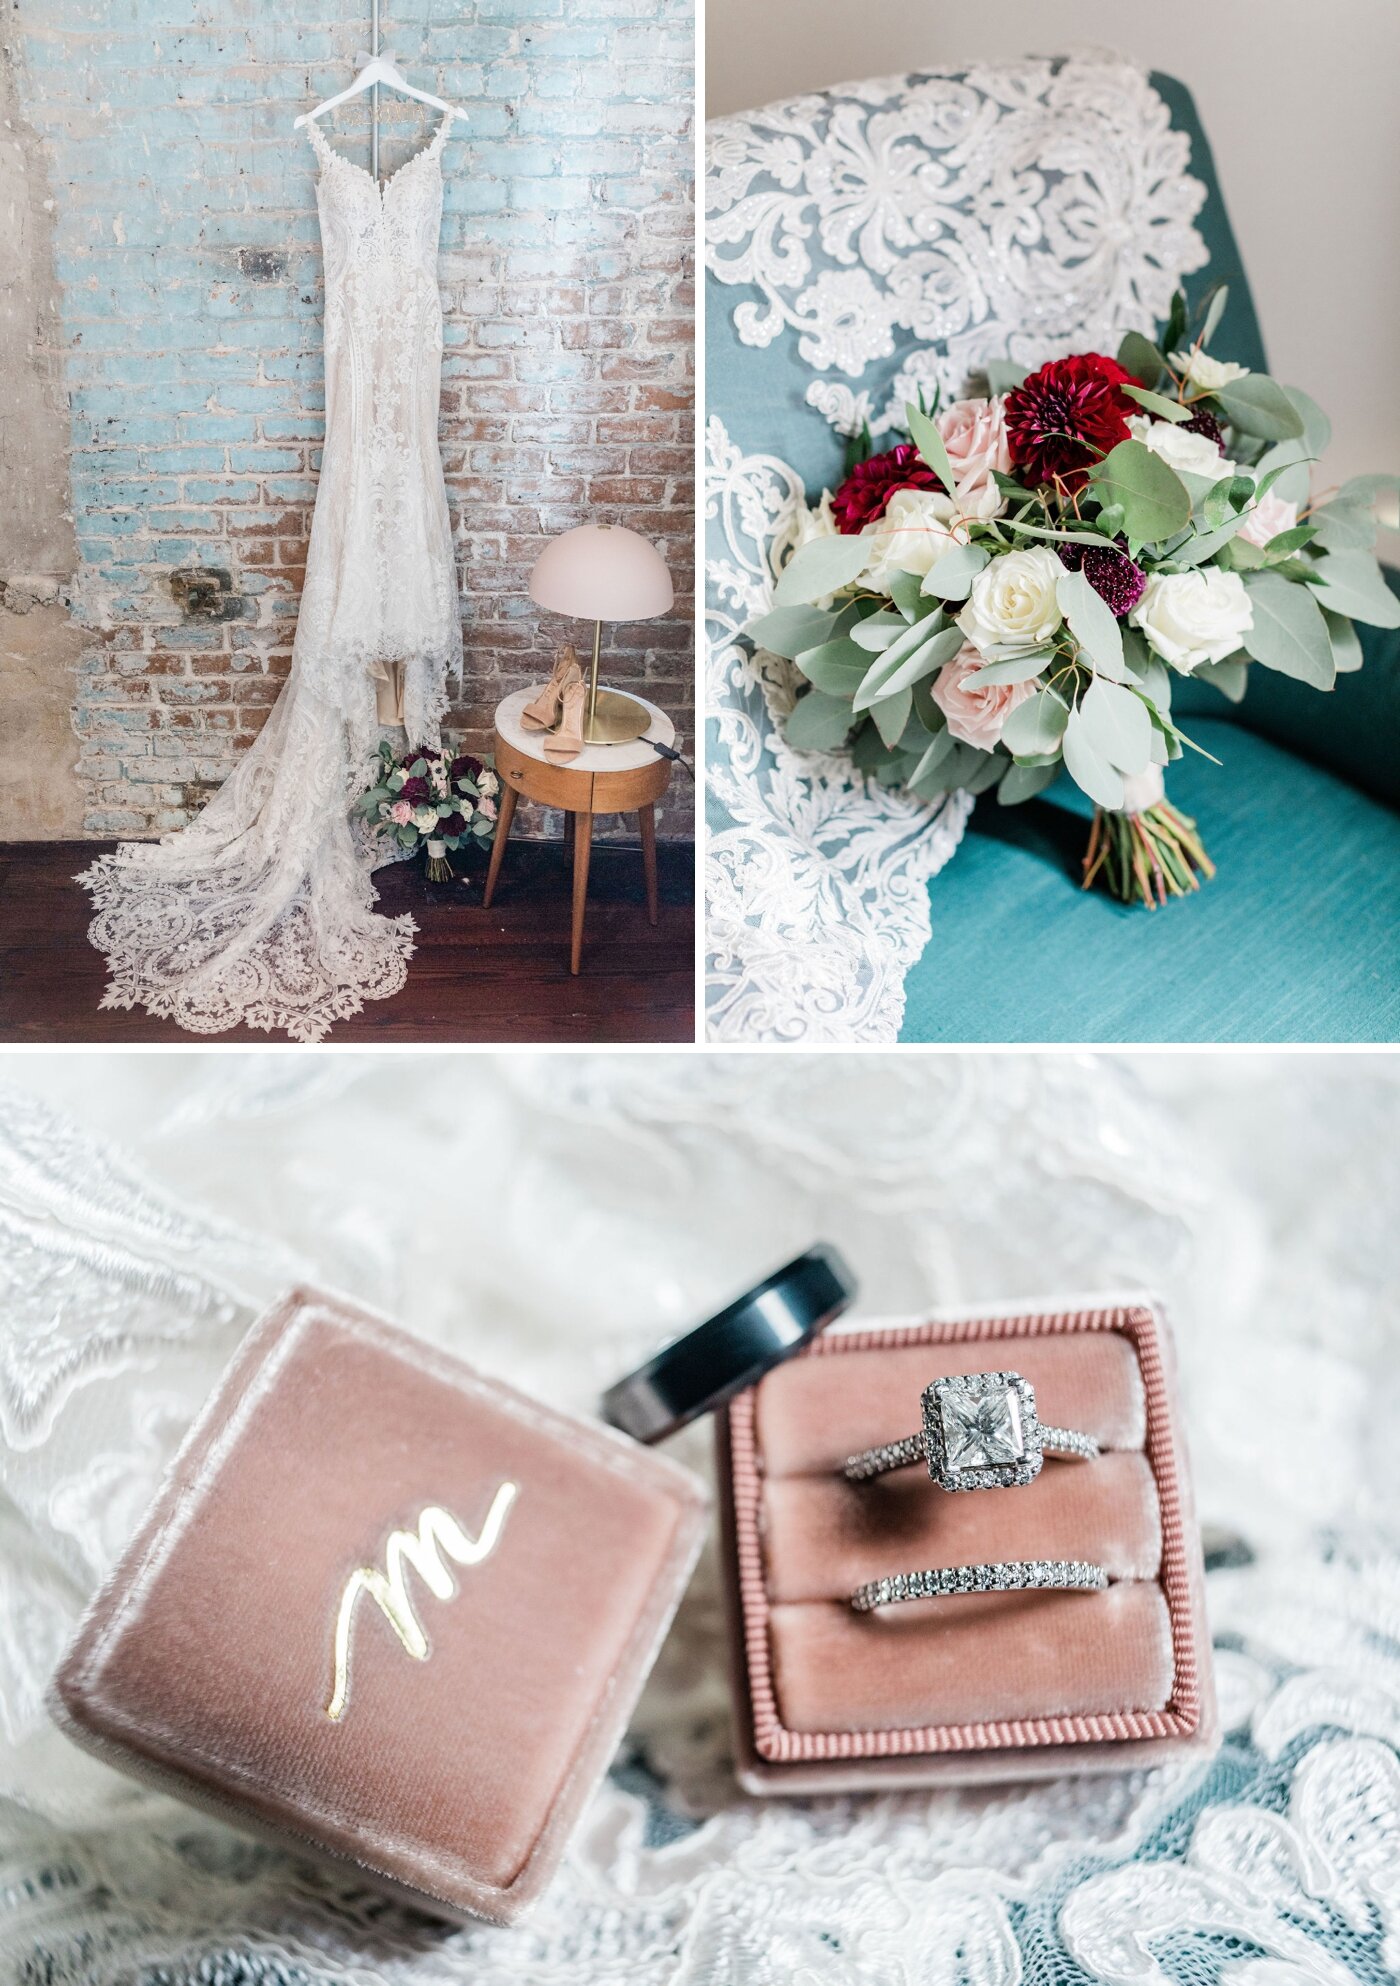 Harper Fowlkes House and Soho South Cafe Fall Wedding in Savannah by Apt. B Photography